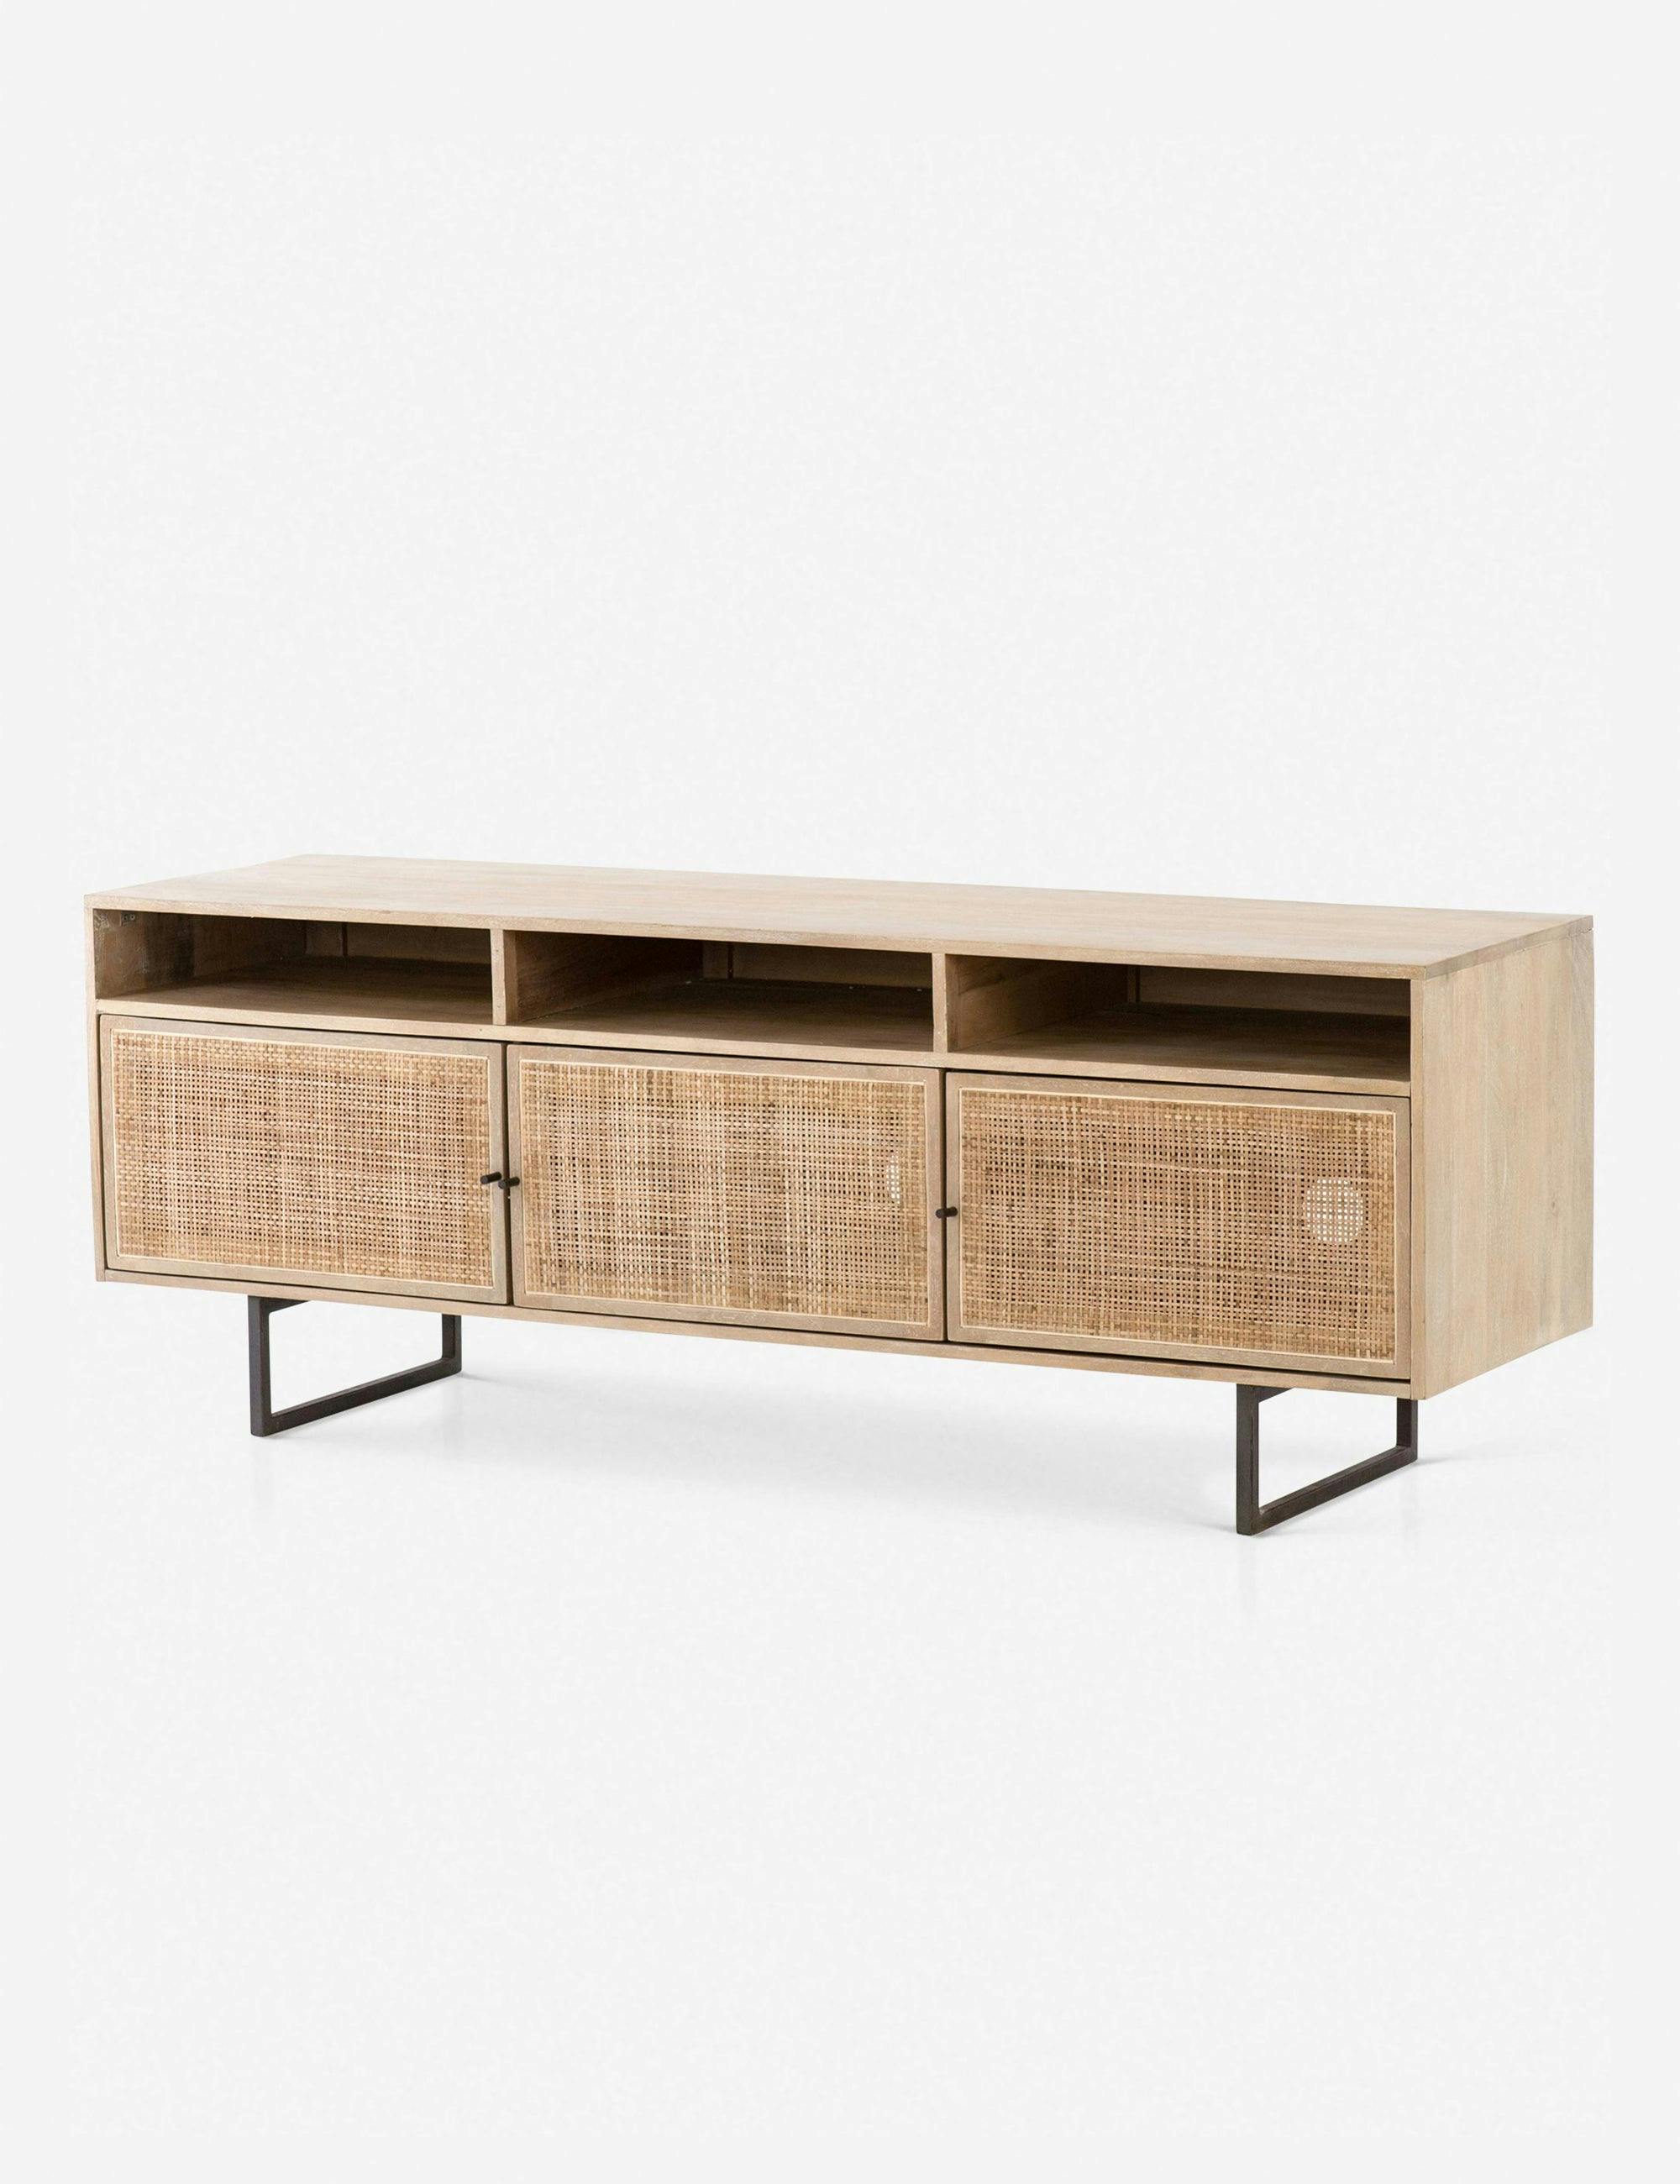 Carmel 65'' Brown Modern Media Console with Woven Cane Doors